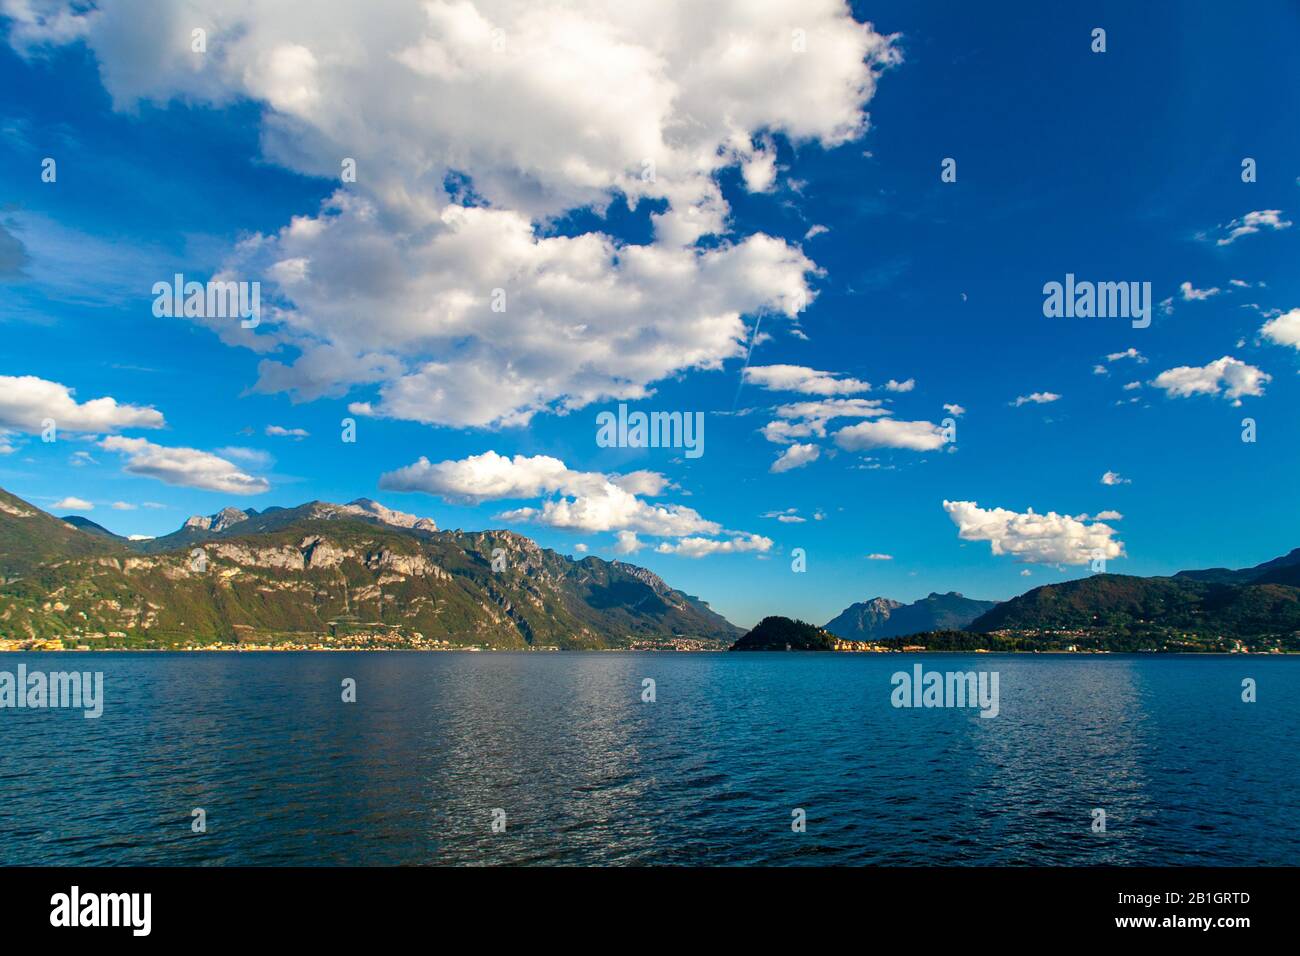 Lake Como landscape with mountains, blue sky and white clouds, Lombardy, italy Stock Photo